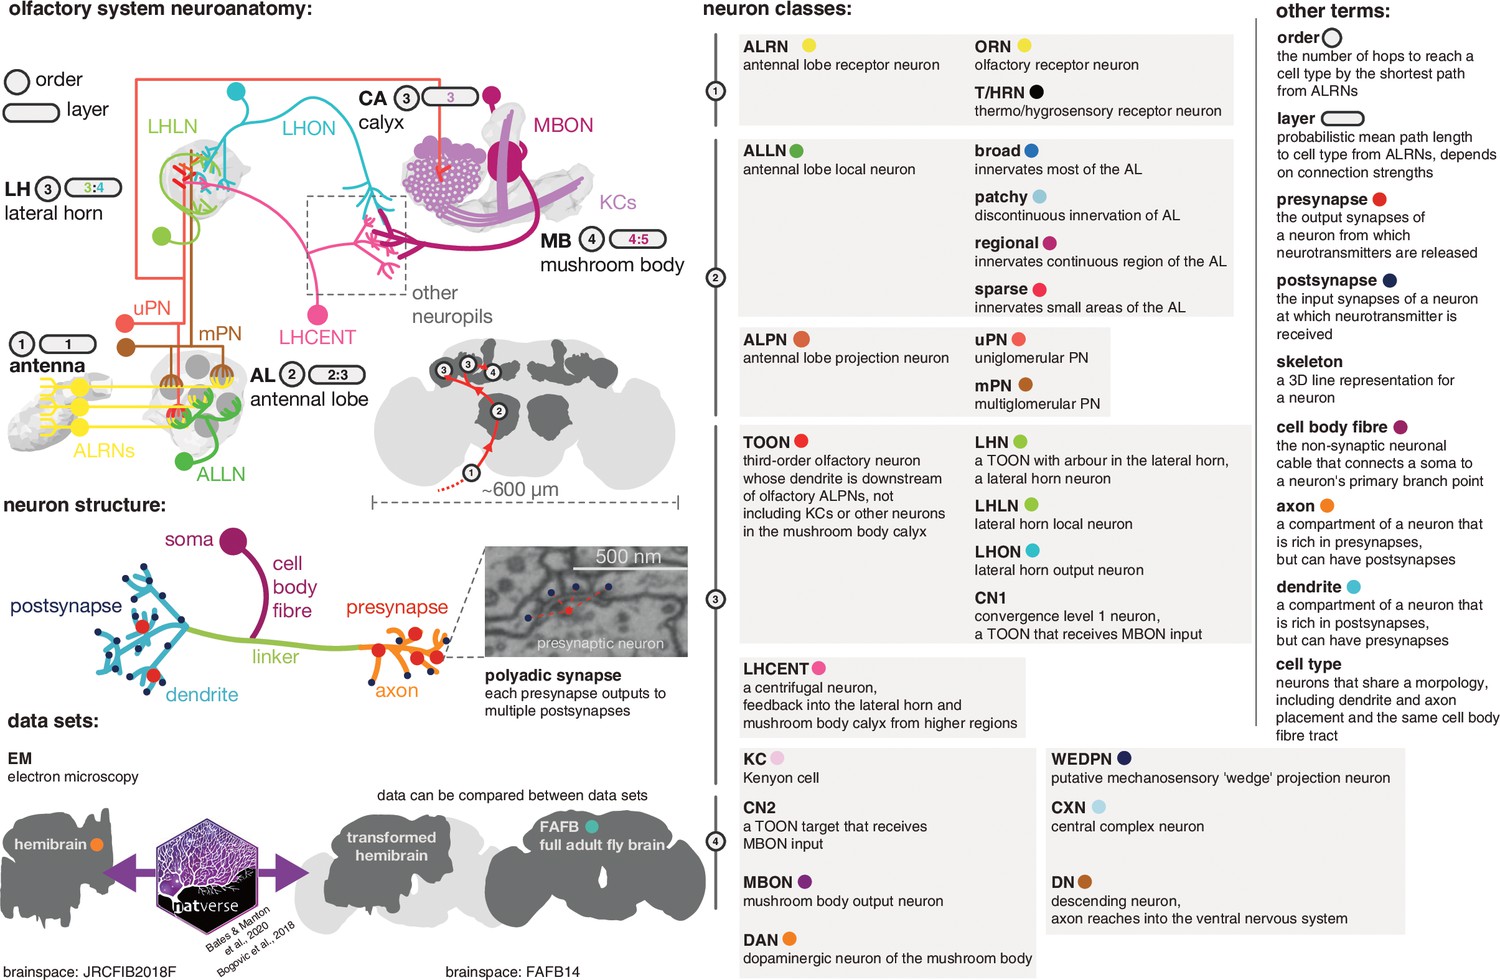 Figures and data in Information flow, cell types and stereotypy in a full  olfactory connectome